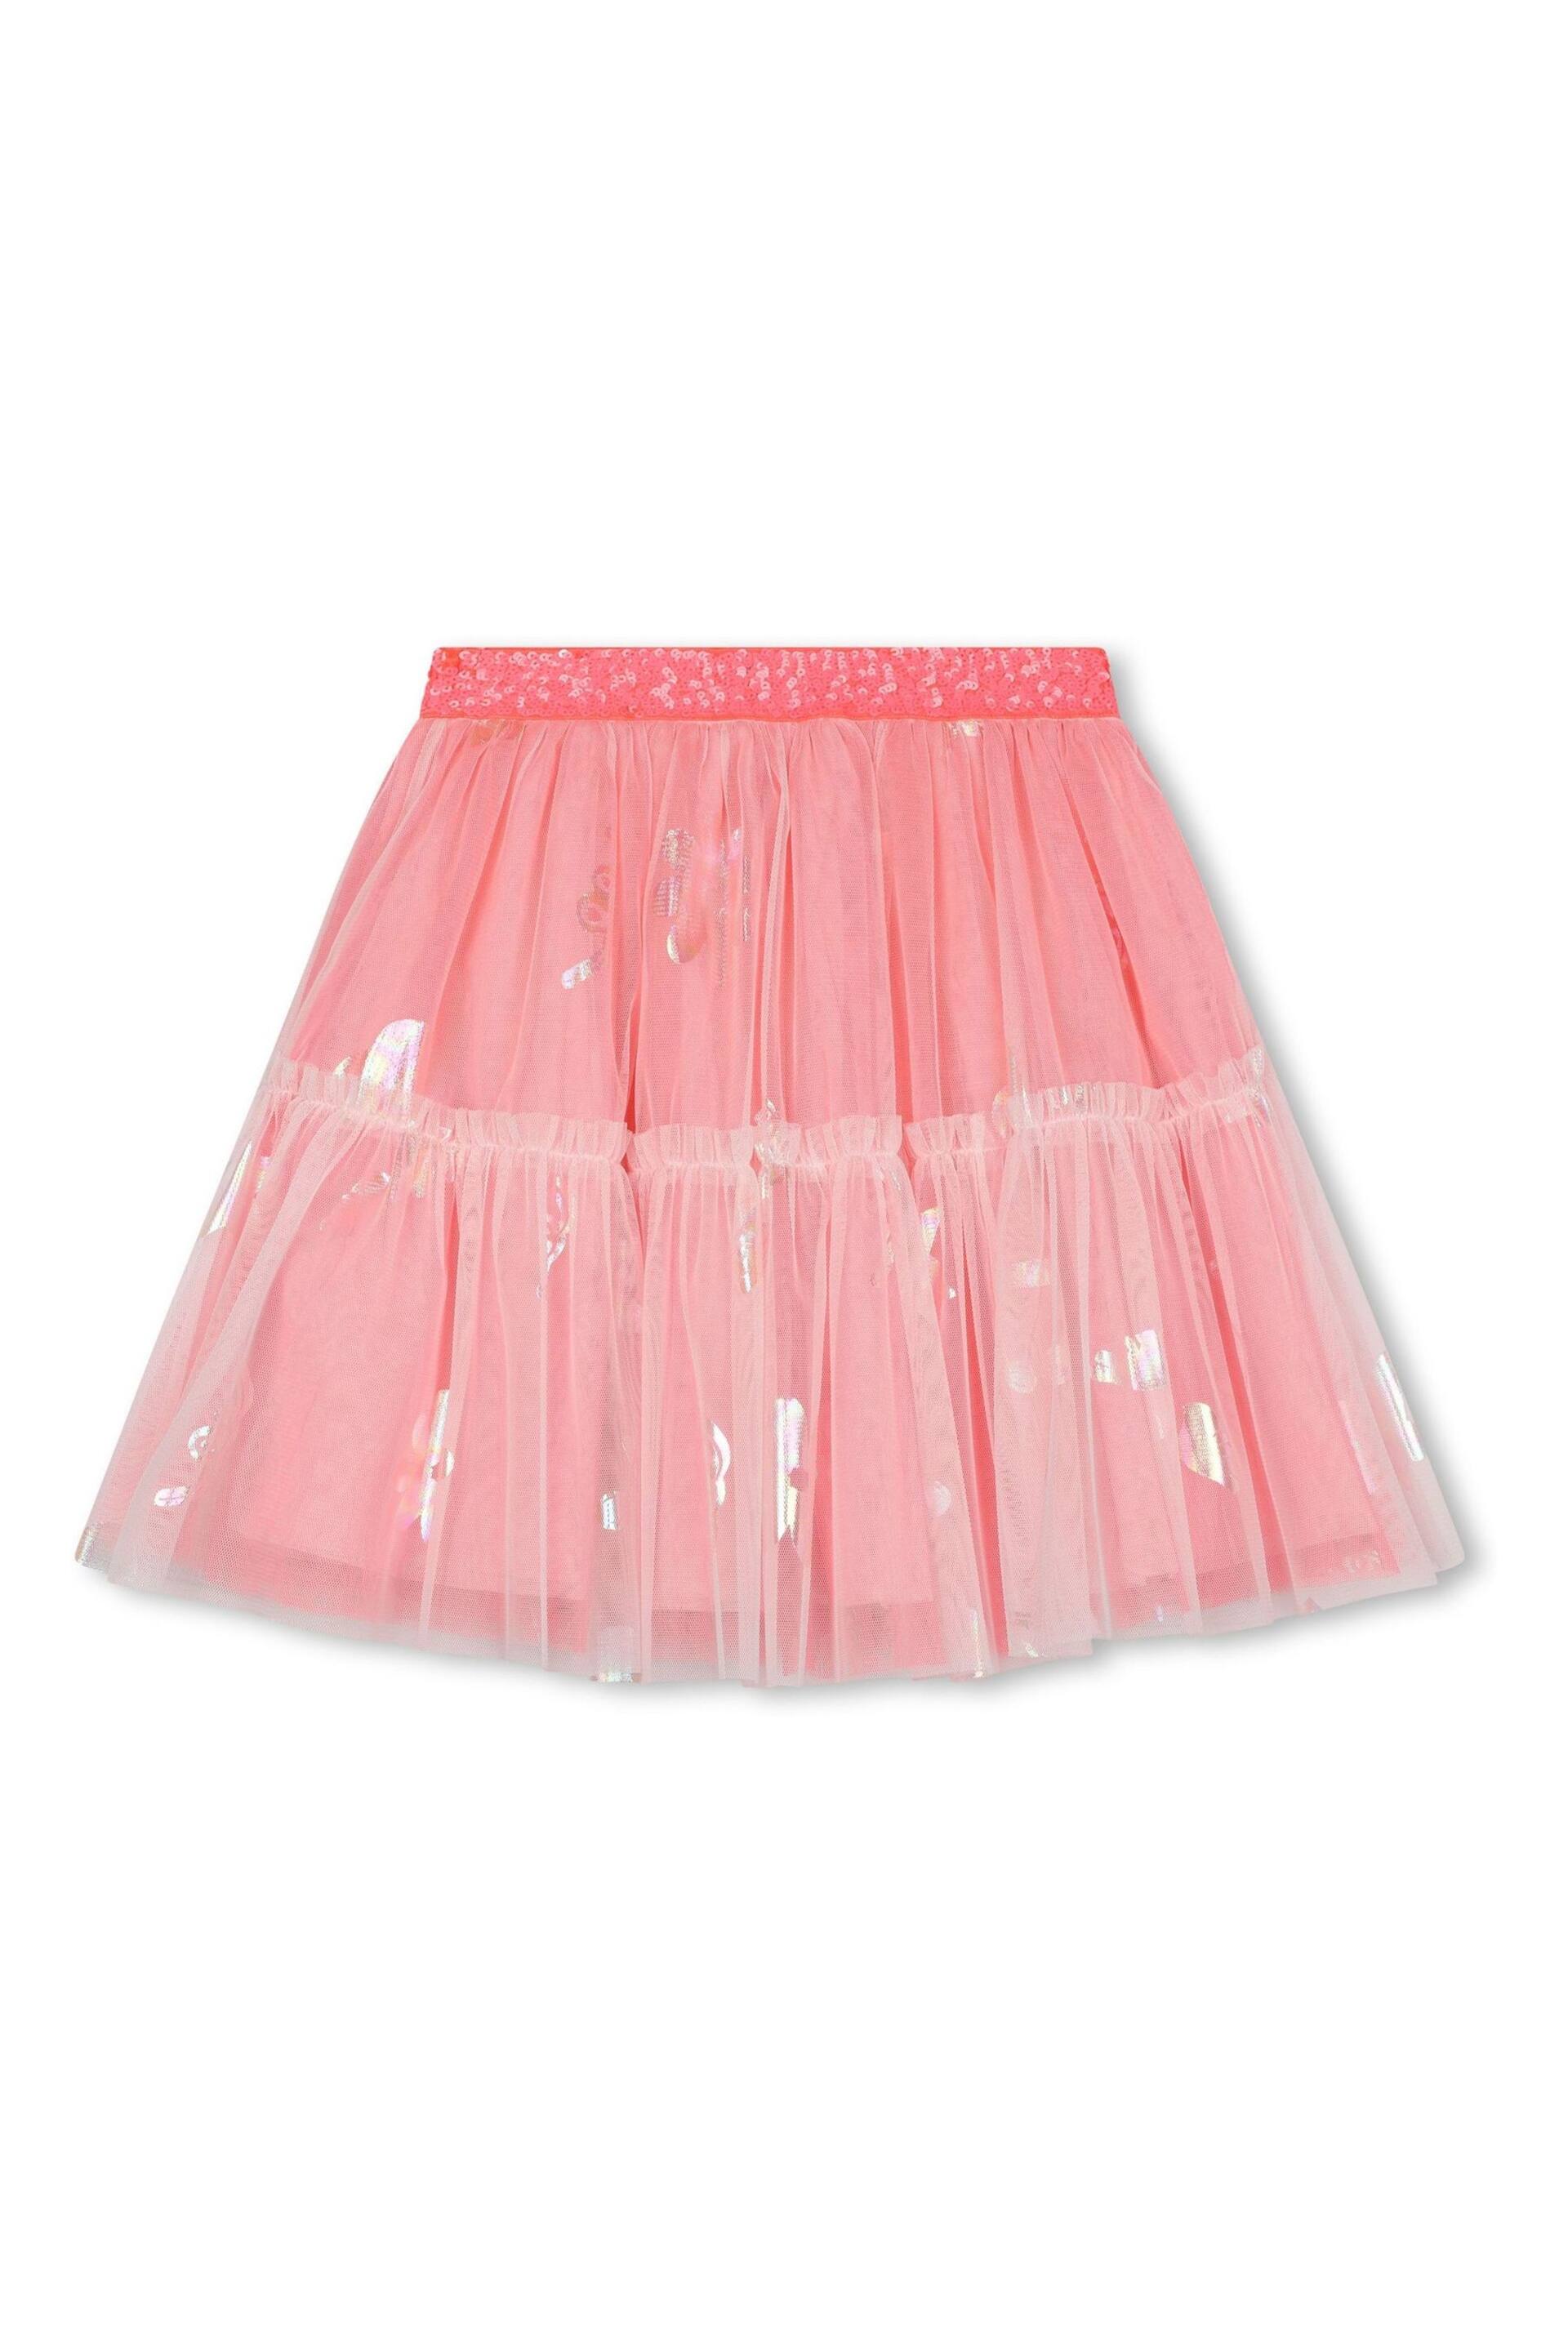 Billieblush Pink Double Layer Mesh Sequin Skirt - Image 1 of 3